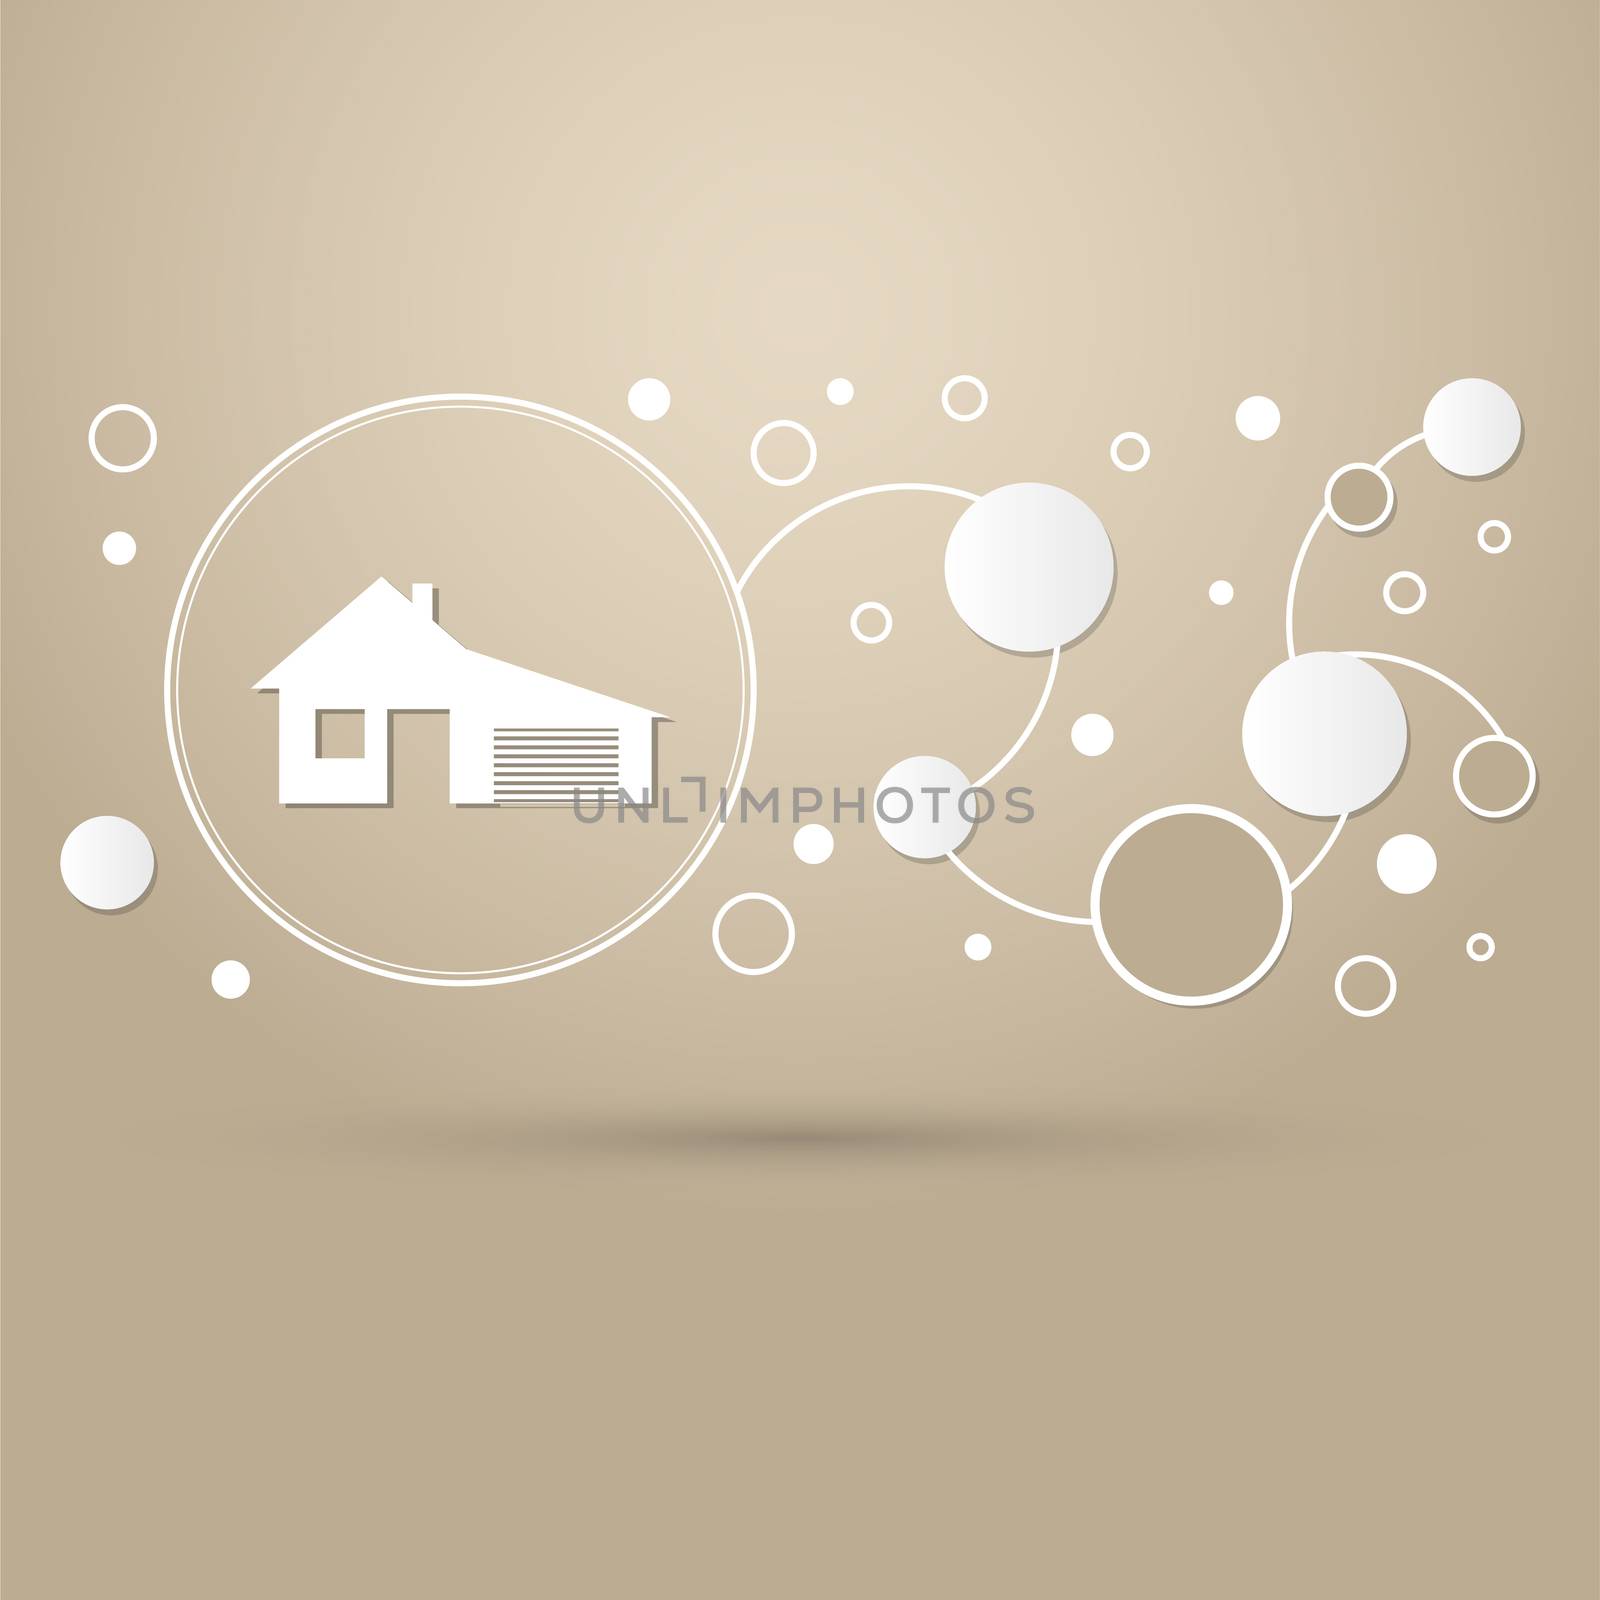 house with garage icon on a brown background elegant style and modern design infographic.  by Adamchuk